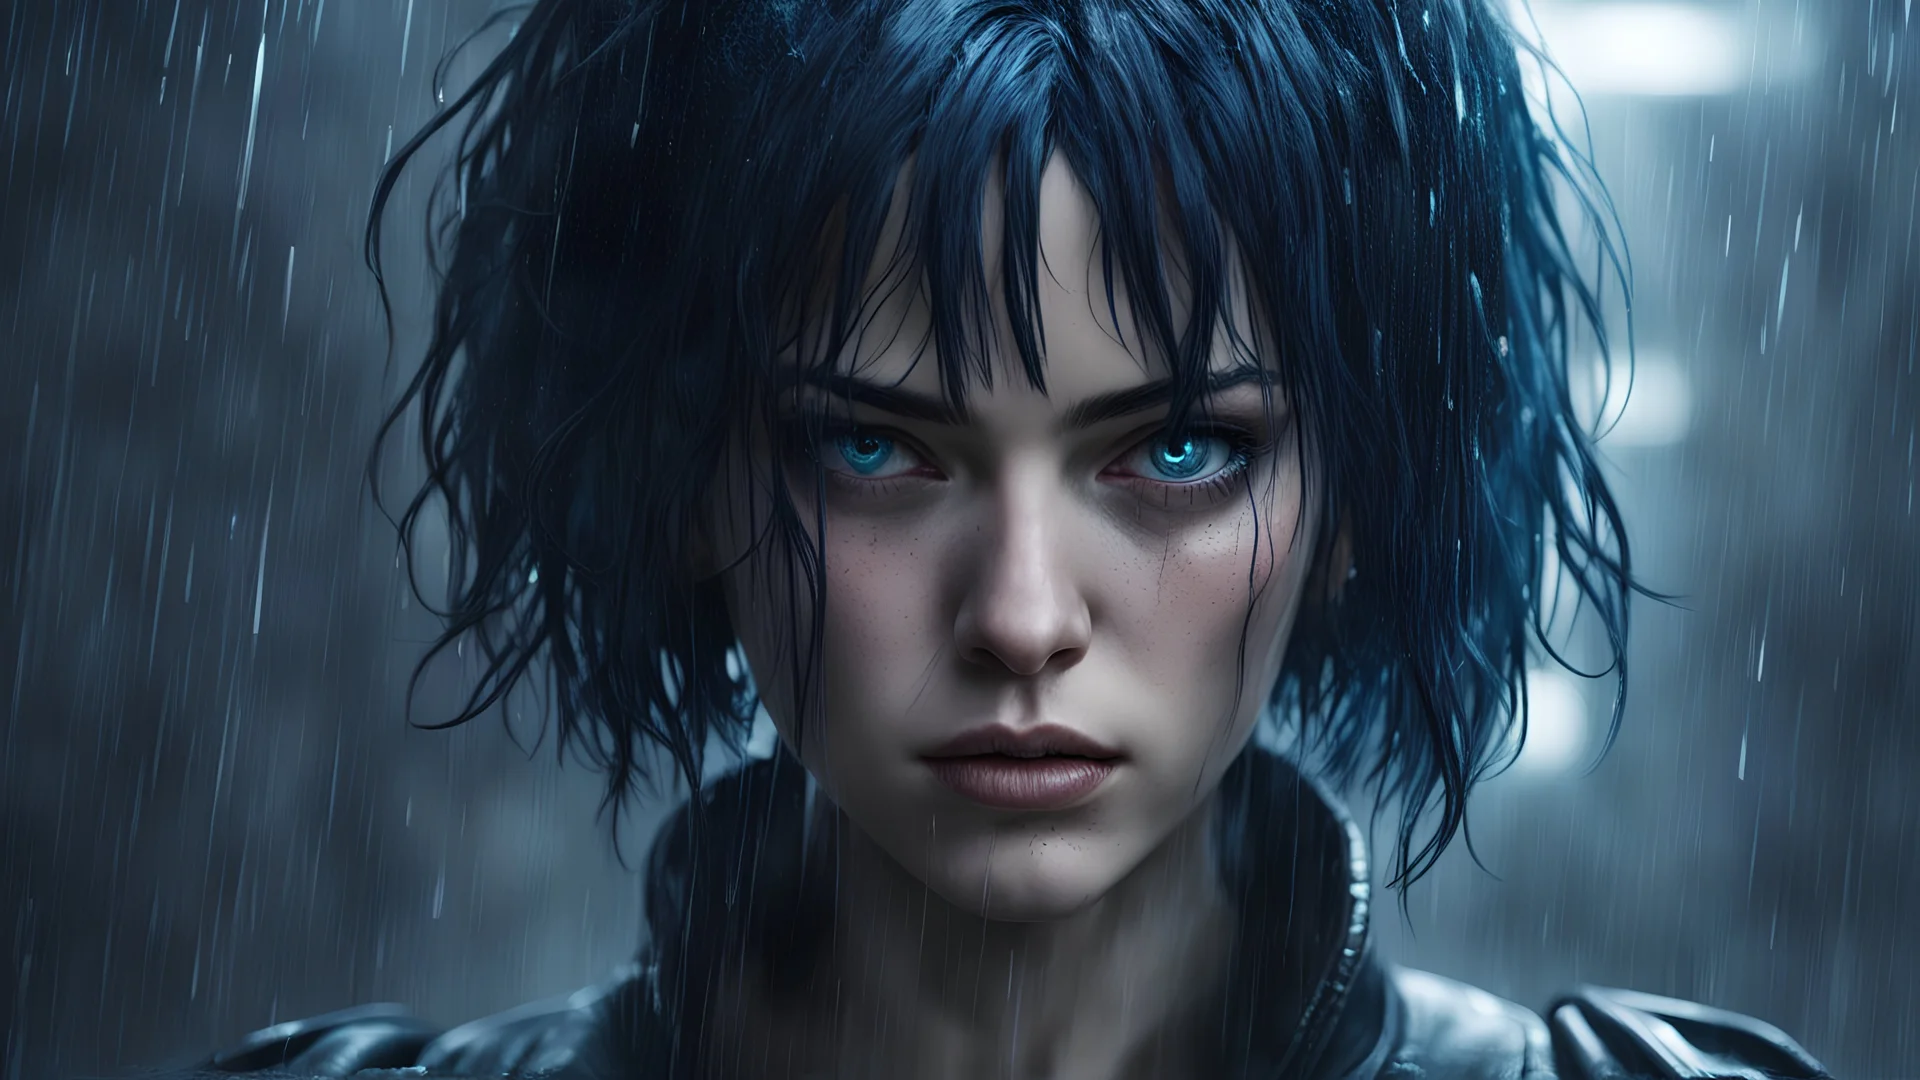 blue-black hair woman, cyberpunk, solo, ghost in the shell, portrait, Rebecca, edgerunners, realistic, rain, dark atmosphere, future, dystropian٫ With a little tattoo٫ With a serious and angry look